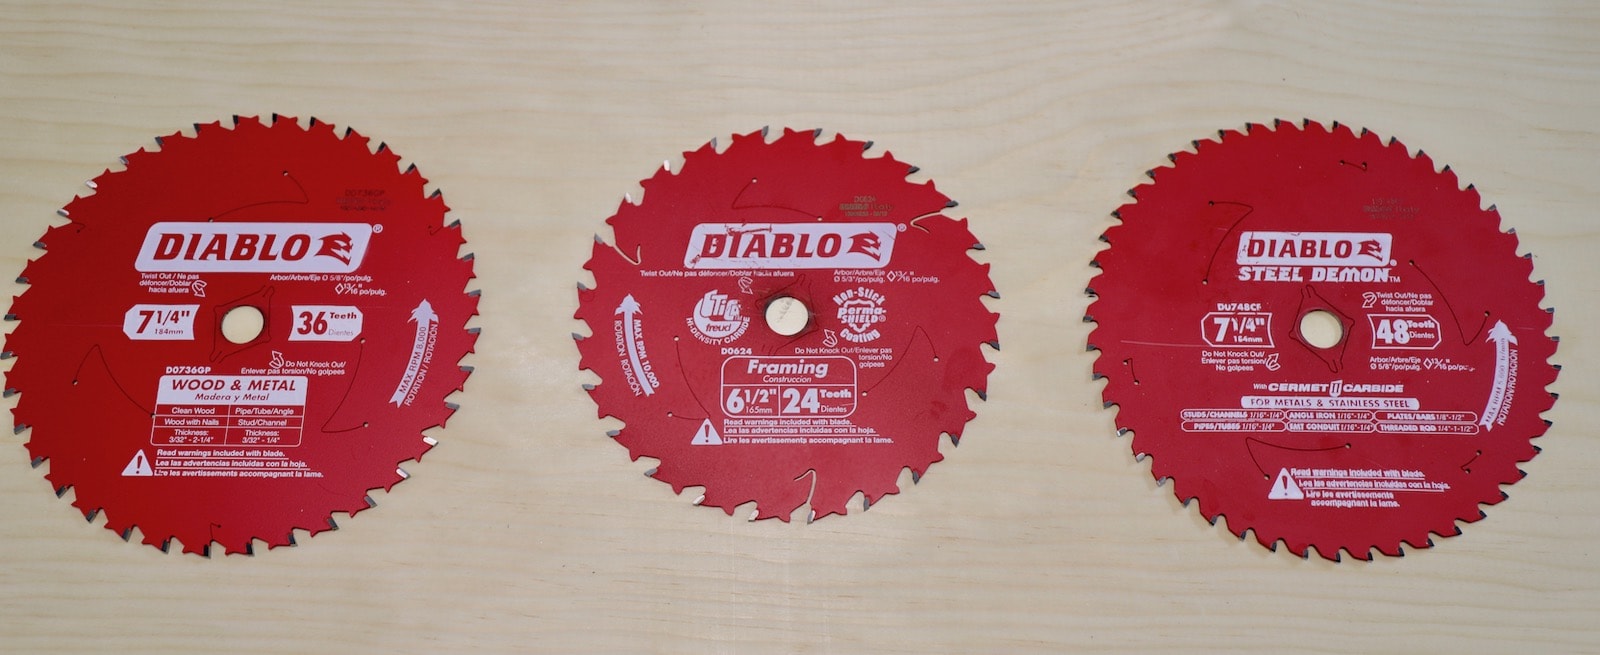 Circular Saw Blades - Circular saws are sized by the size of their blades. Circular saws come in various sizes but 7-1/4" is standard and can handle many jobs. Circular saw blades from Diablo can cut wood and metal, wood only, and metal only. - Thrift Diving